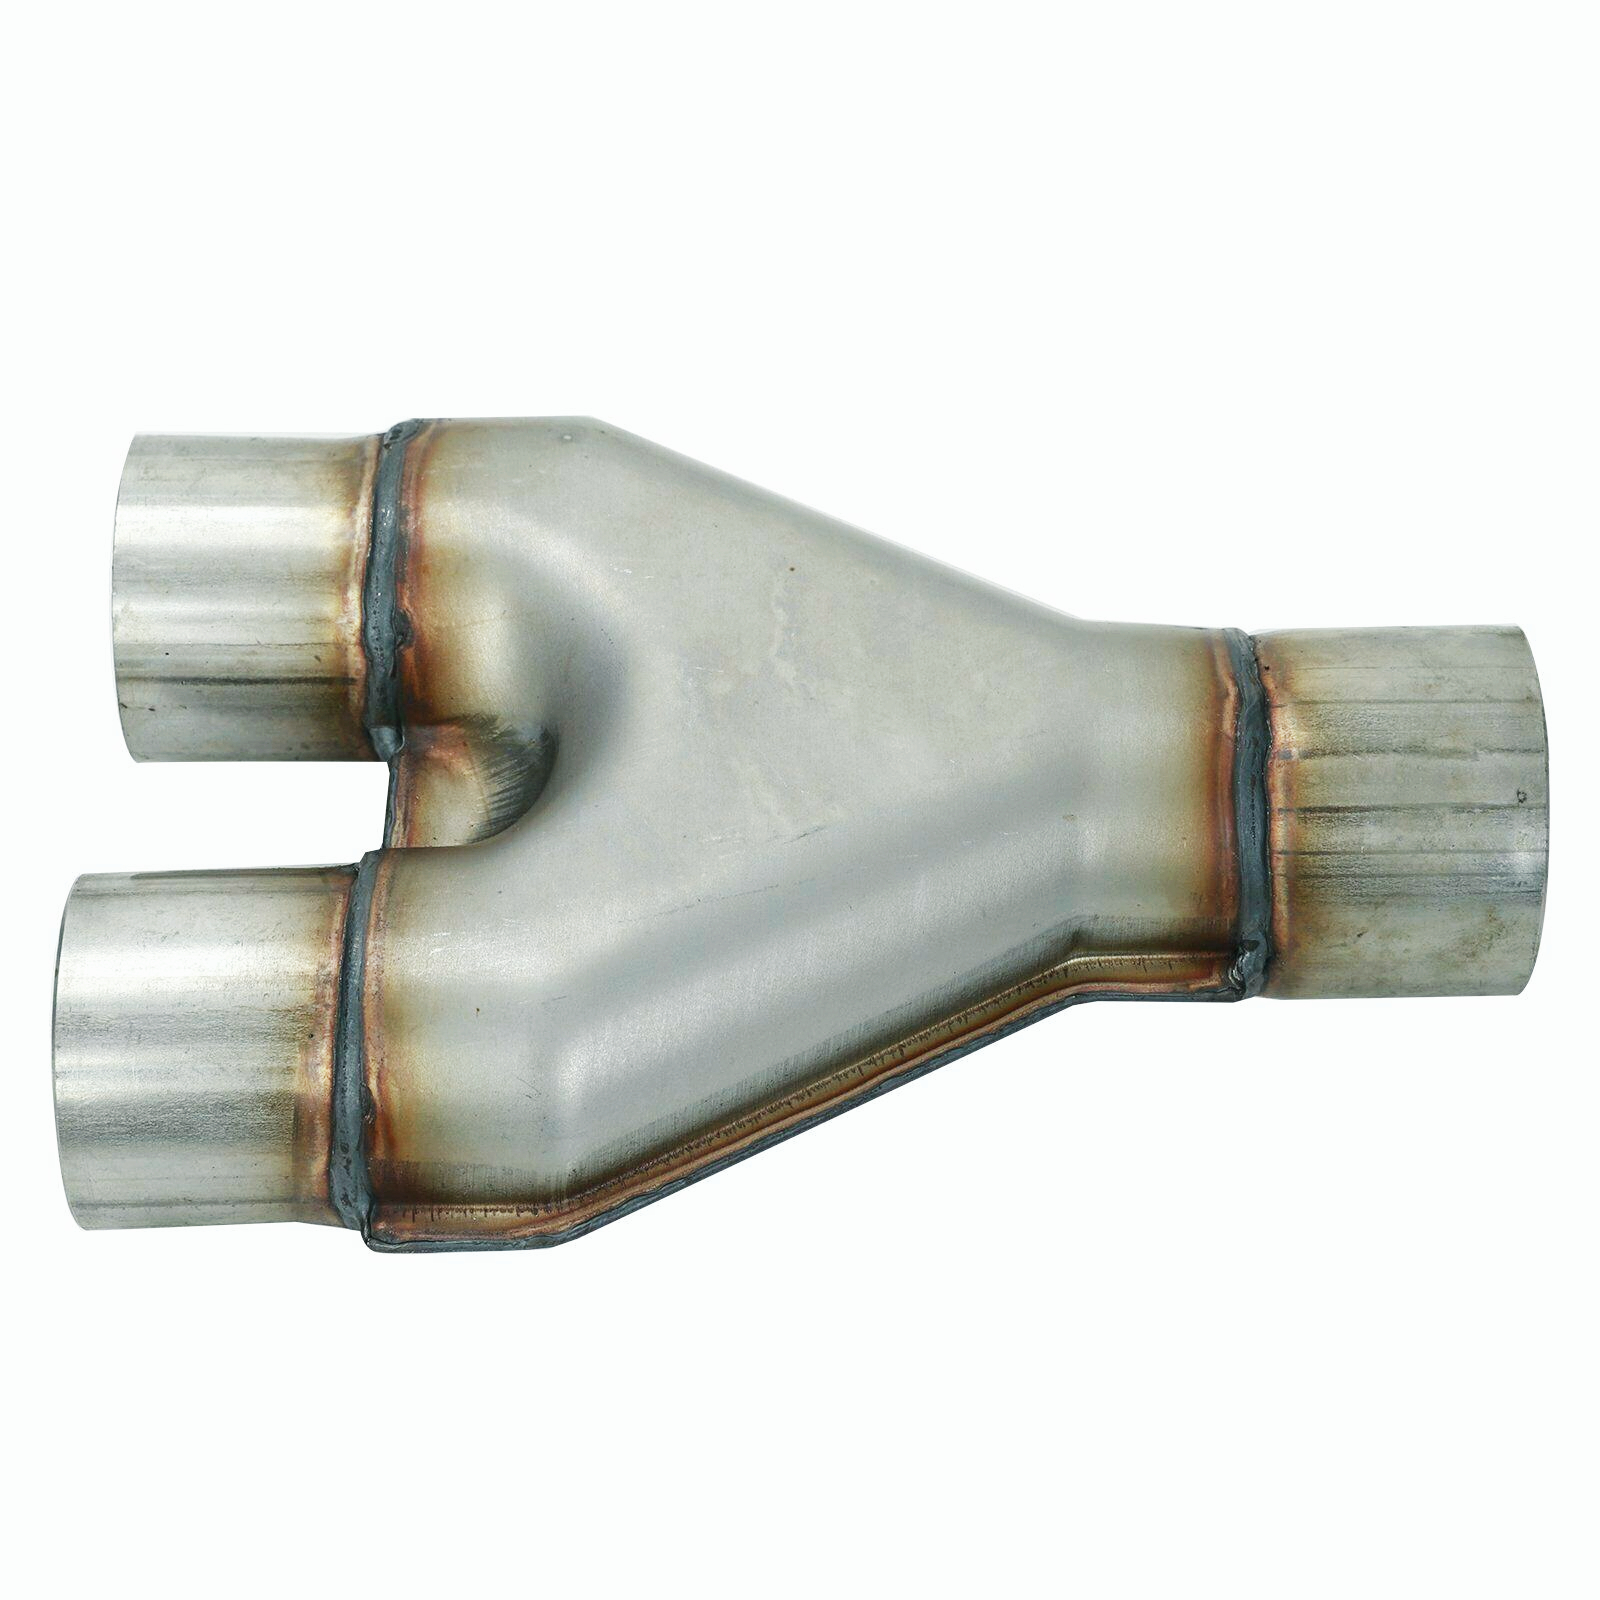 Stainless Steel Component Adapter Connector 2.25inlet,2.25 outlet